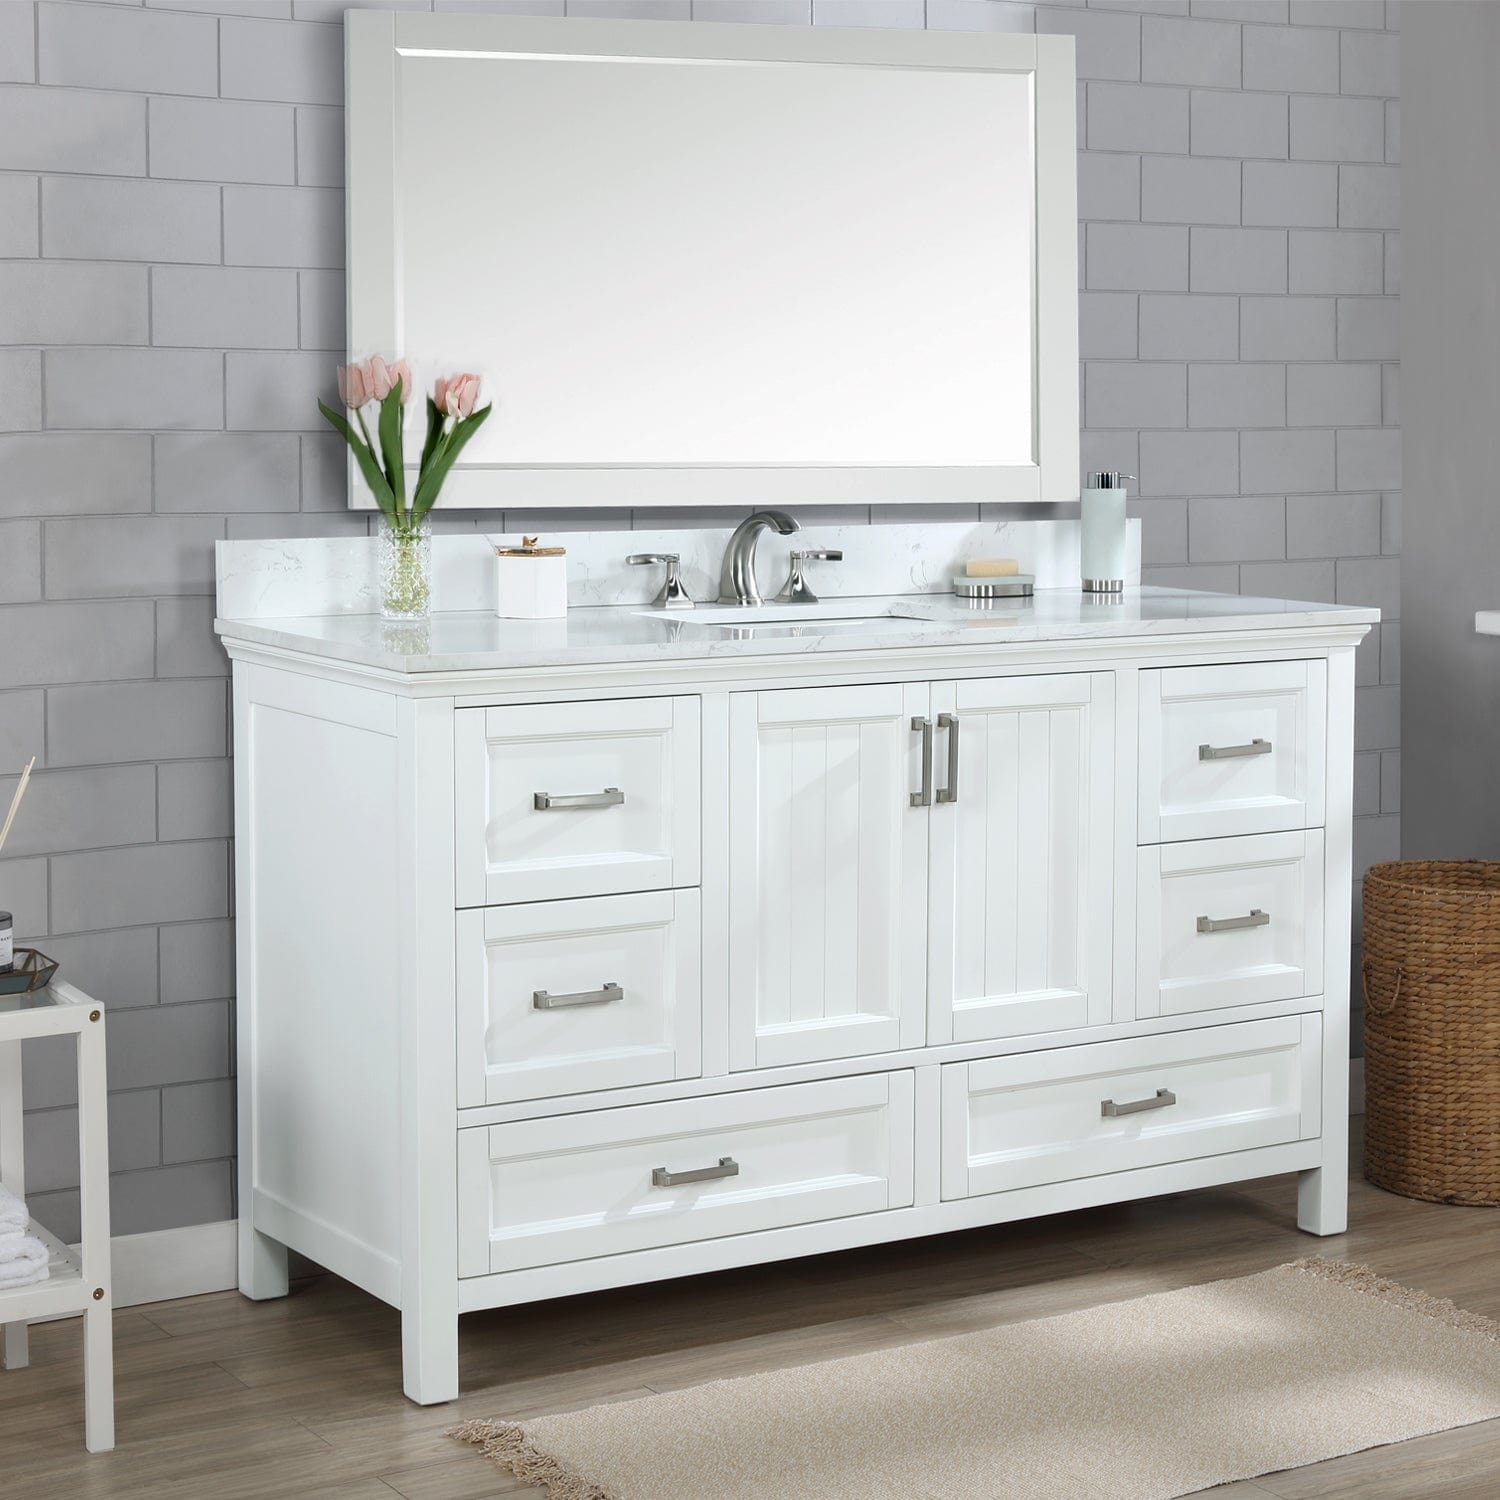 Altair Isla 60" Single Bathroom Vanity Set in White and Carrara White Marble Countertop with Mirror 538060S-WH-AW - Molaix696952511352Vanity538060S-WH-AW